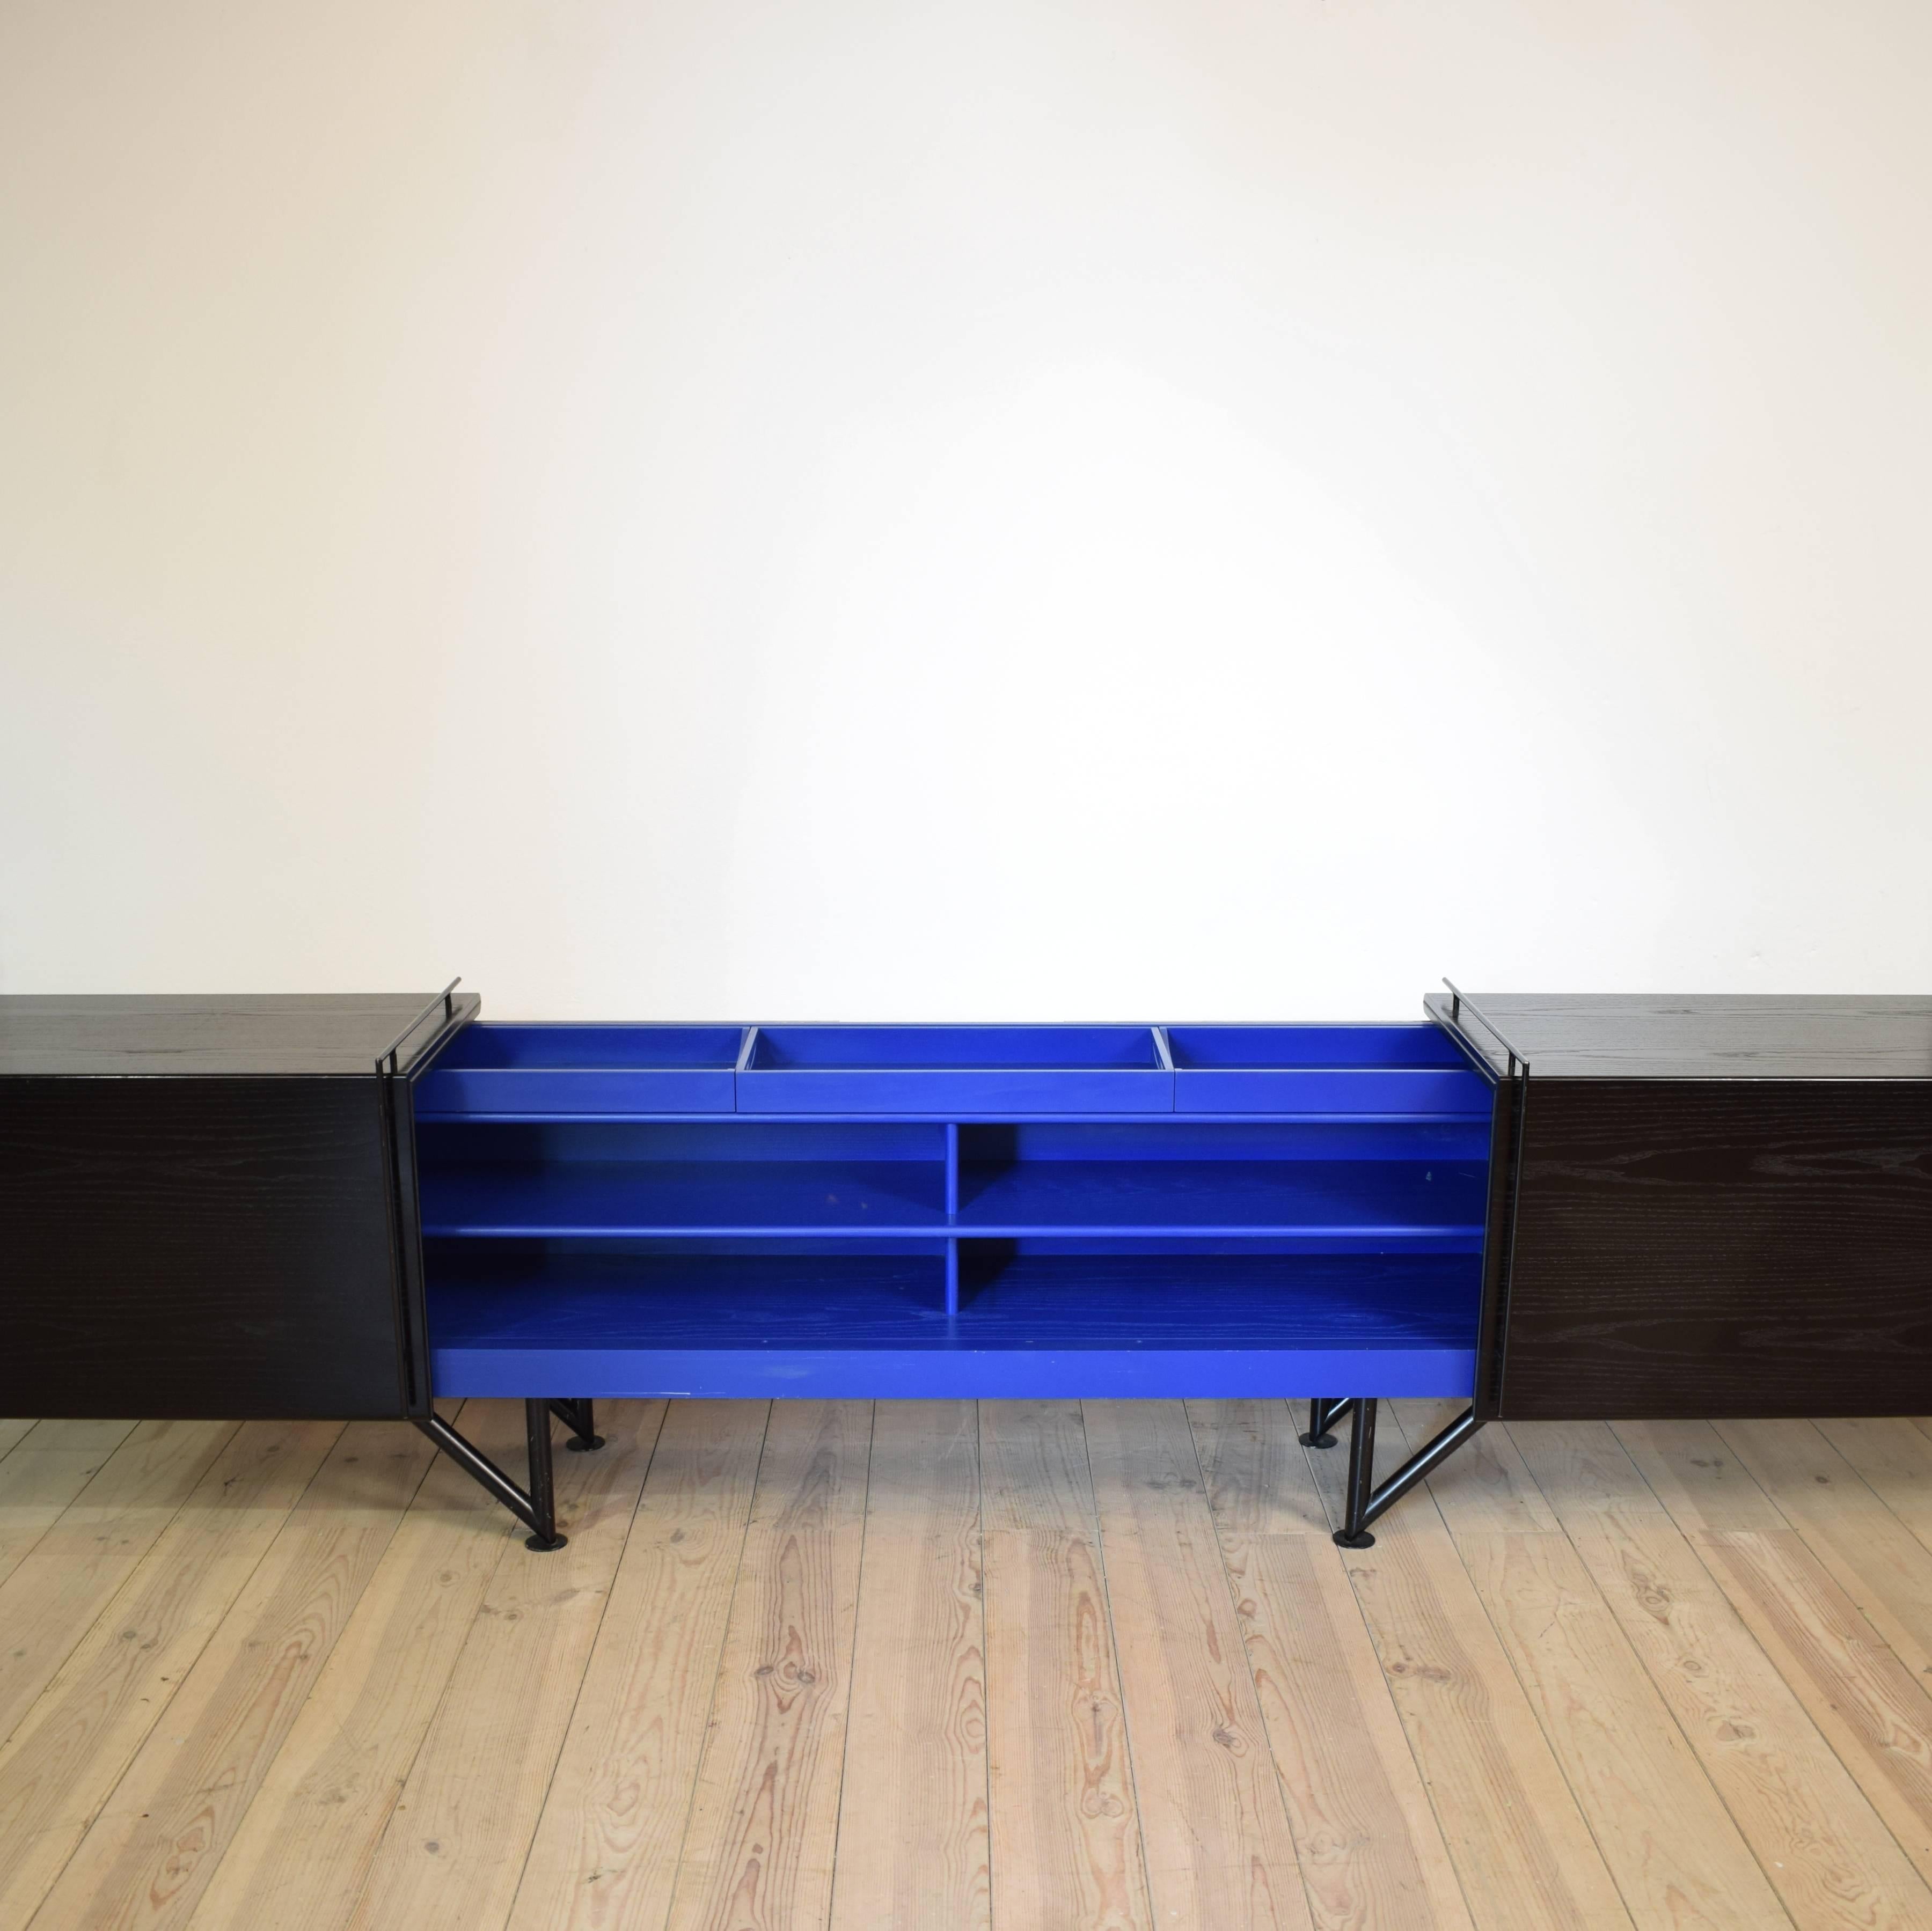 This Postmoderne sideboard was produced and designed in the 1980s. It is a prototype from a German designer.
The corpus is made out of oak veneer which is lacquered black and blue.
You can slide the doors the sideboard on both sides that it expands